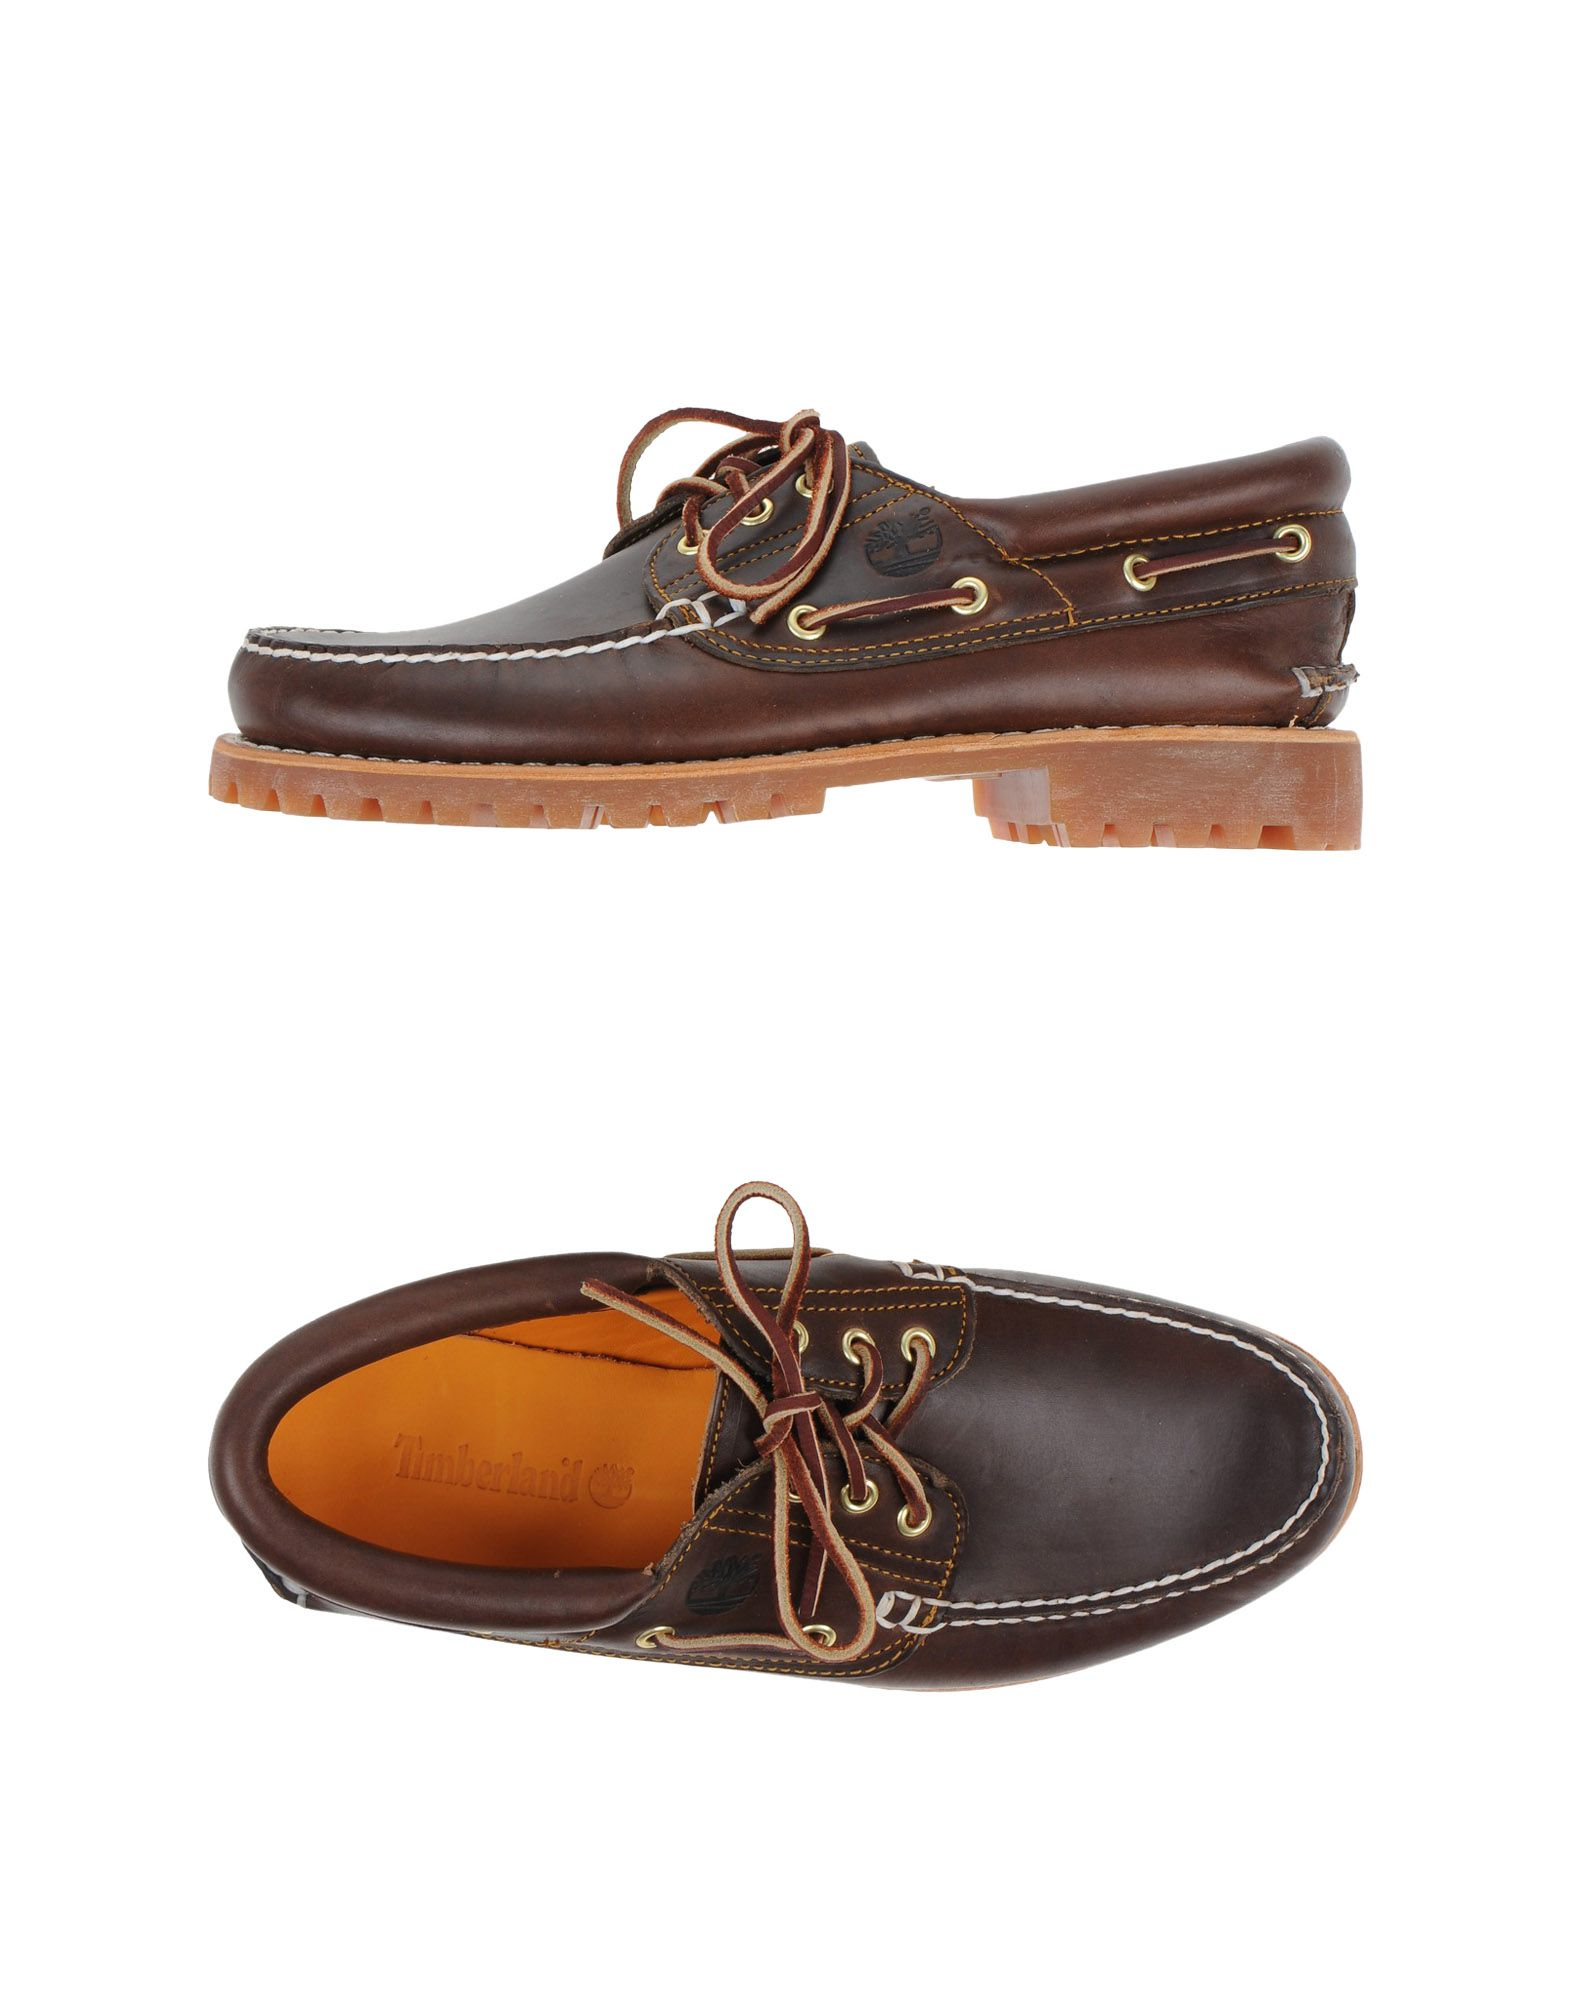 Lyst - Timberland Moccasins in Brown for Men